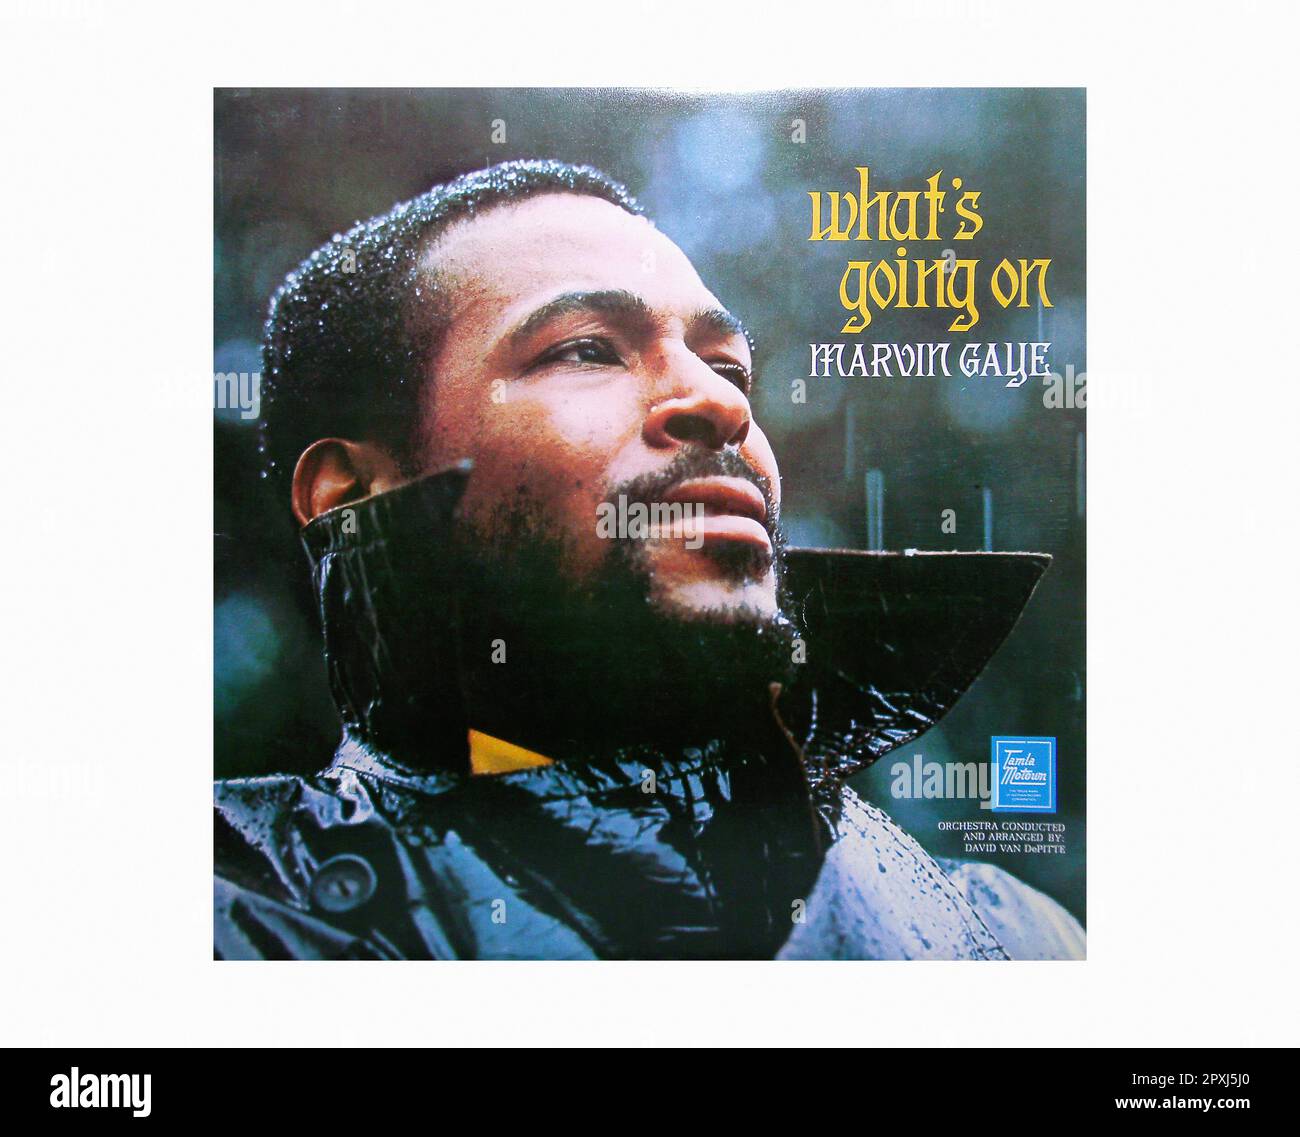 Marvin Gaye - What's Going On [1971] - Vintage Vinyl Record Sleeve Stock Photo